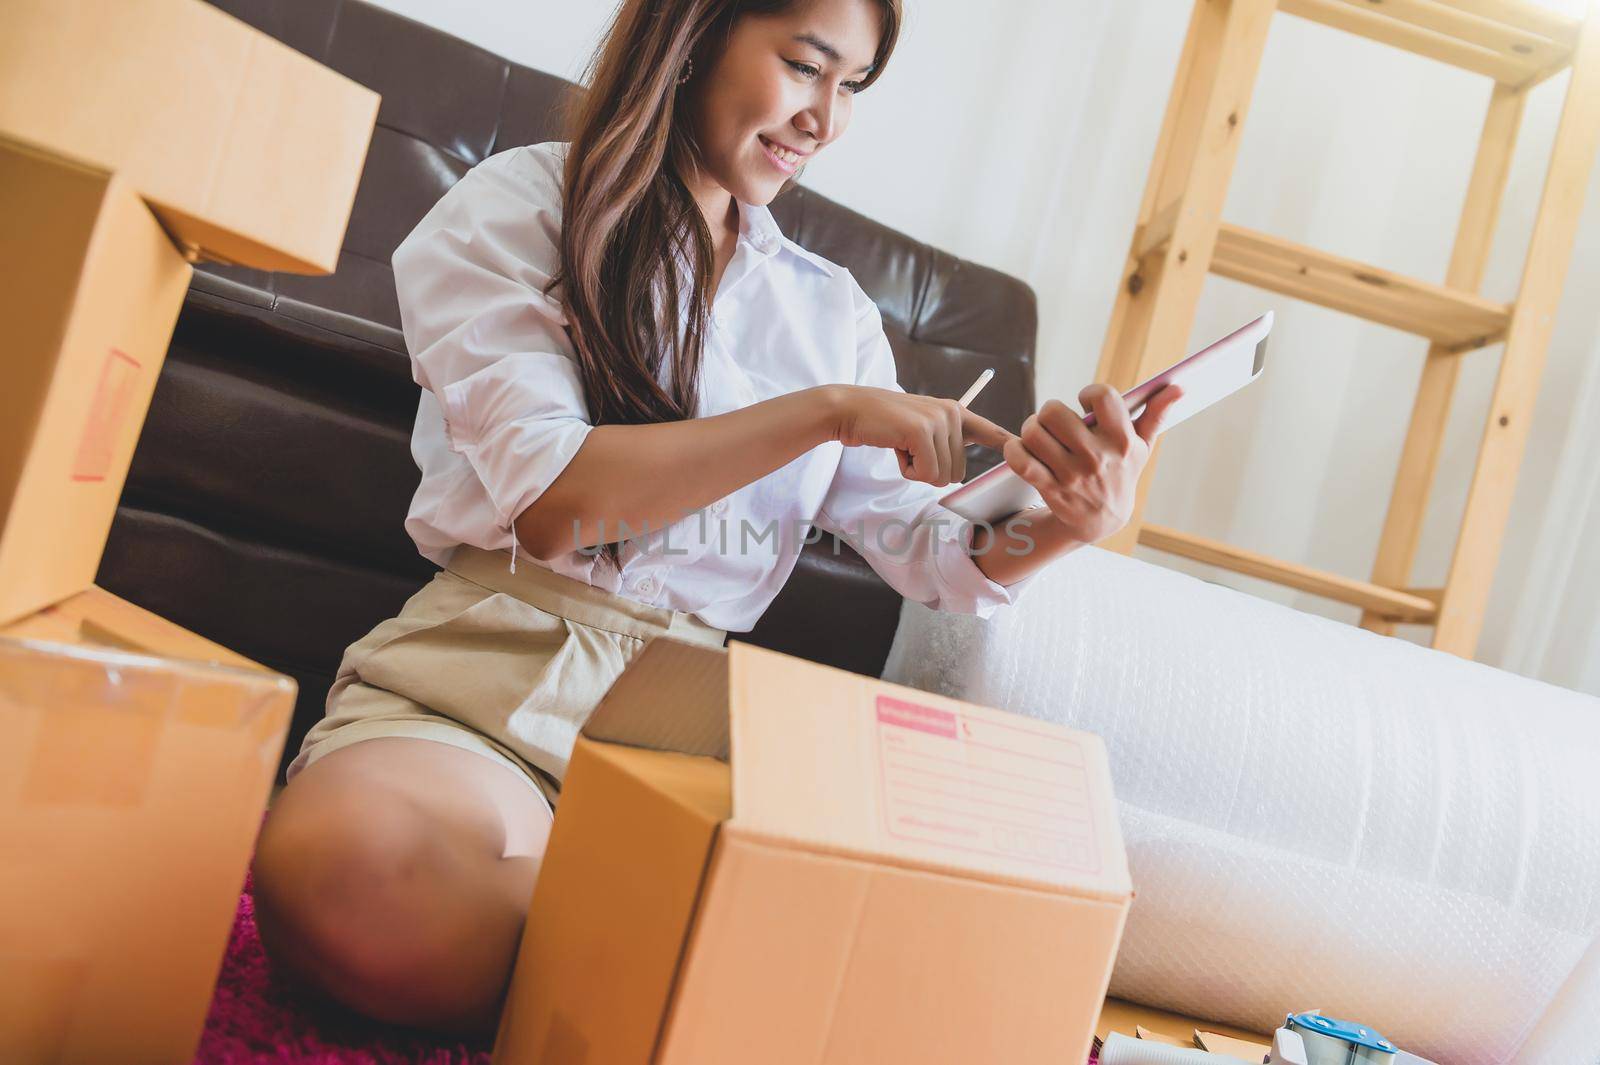 Asian business woman startup small business entrepreneur SME distribution warehouse with parcel mail box. small owner home office. Online marketing and product packaging and delivery service concept